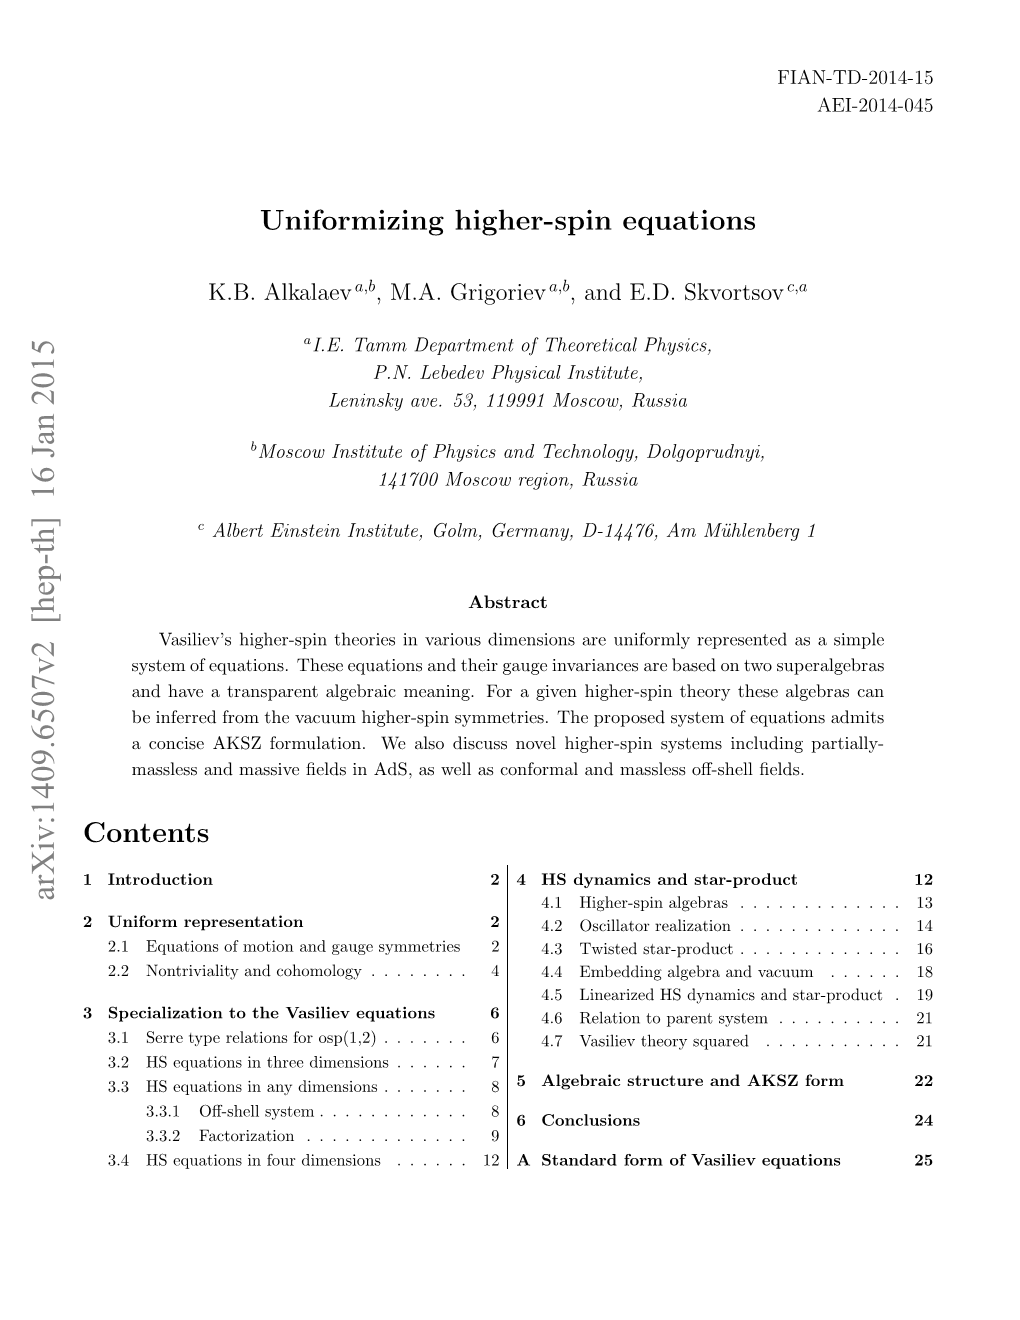 Uniformizing Higher-Spin Equations